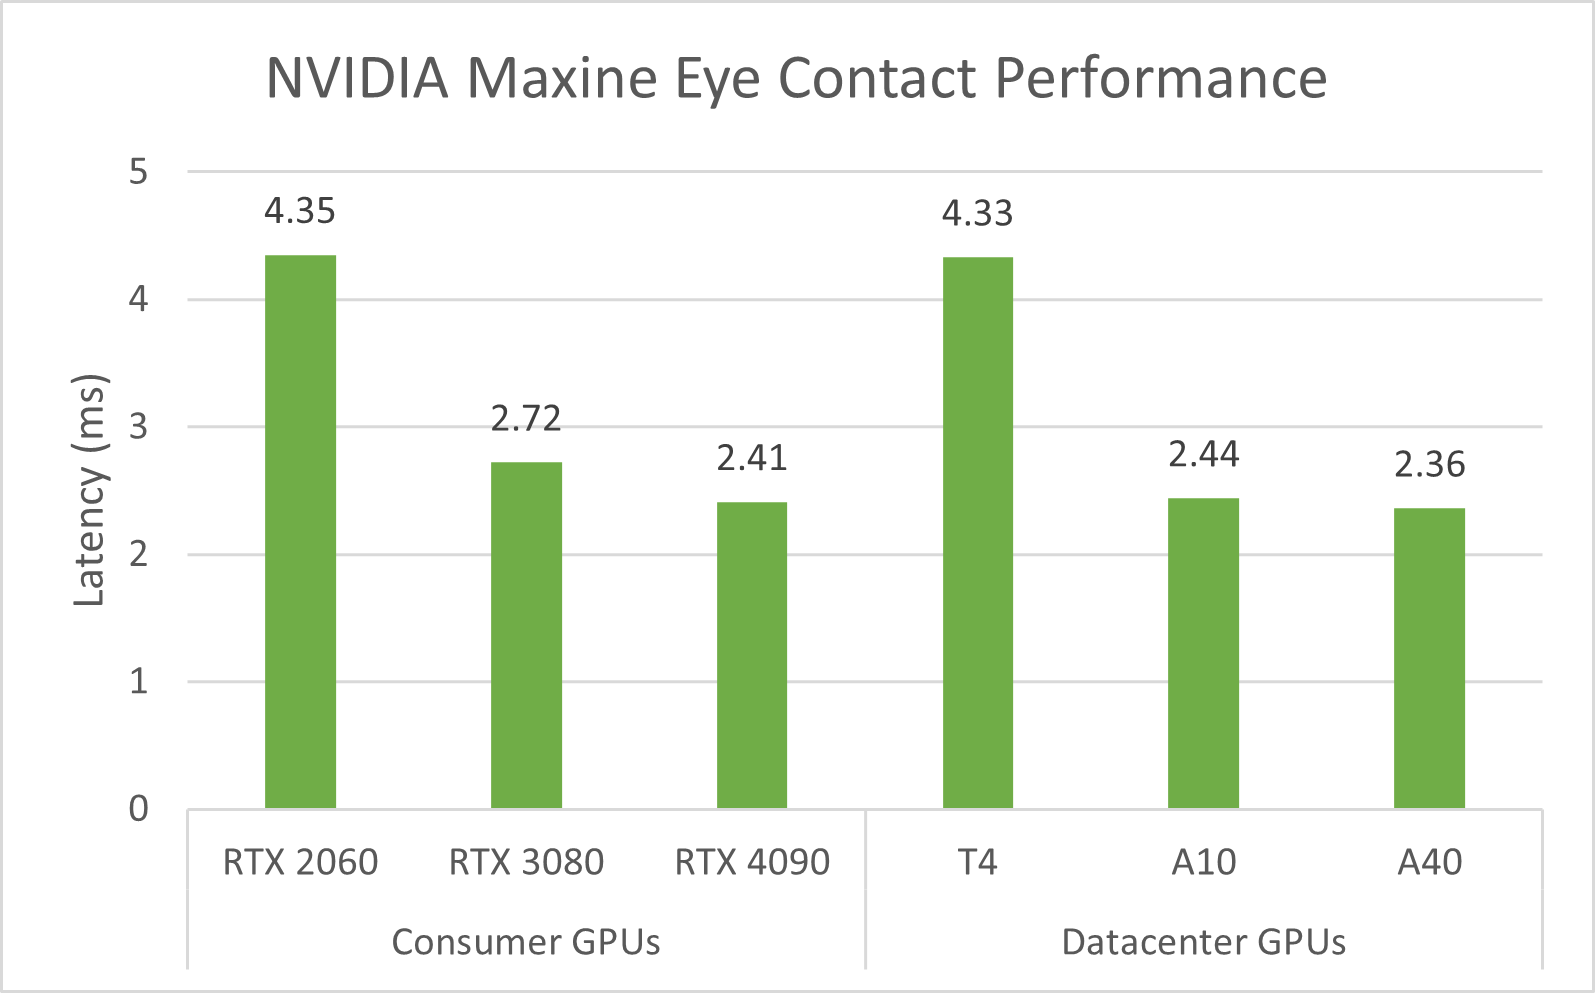 Maxine Eye Contact Performance graph where latency is compared with consumer and data center GPUs.